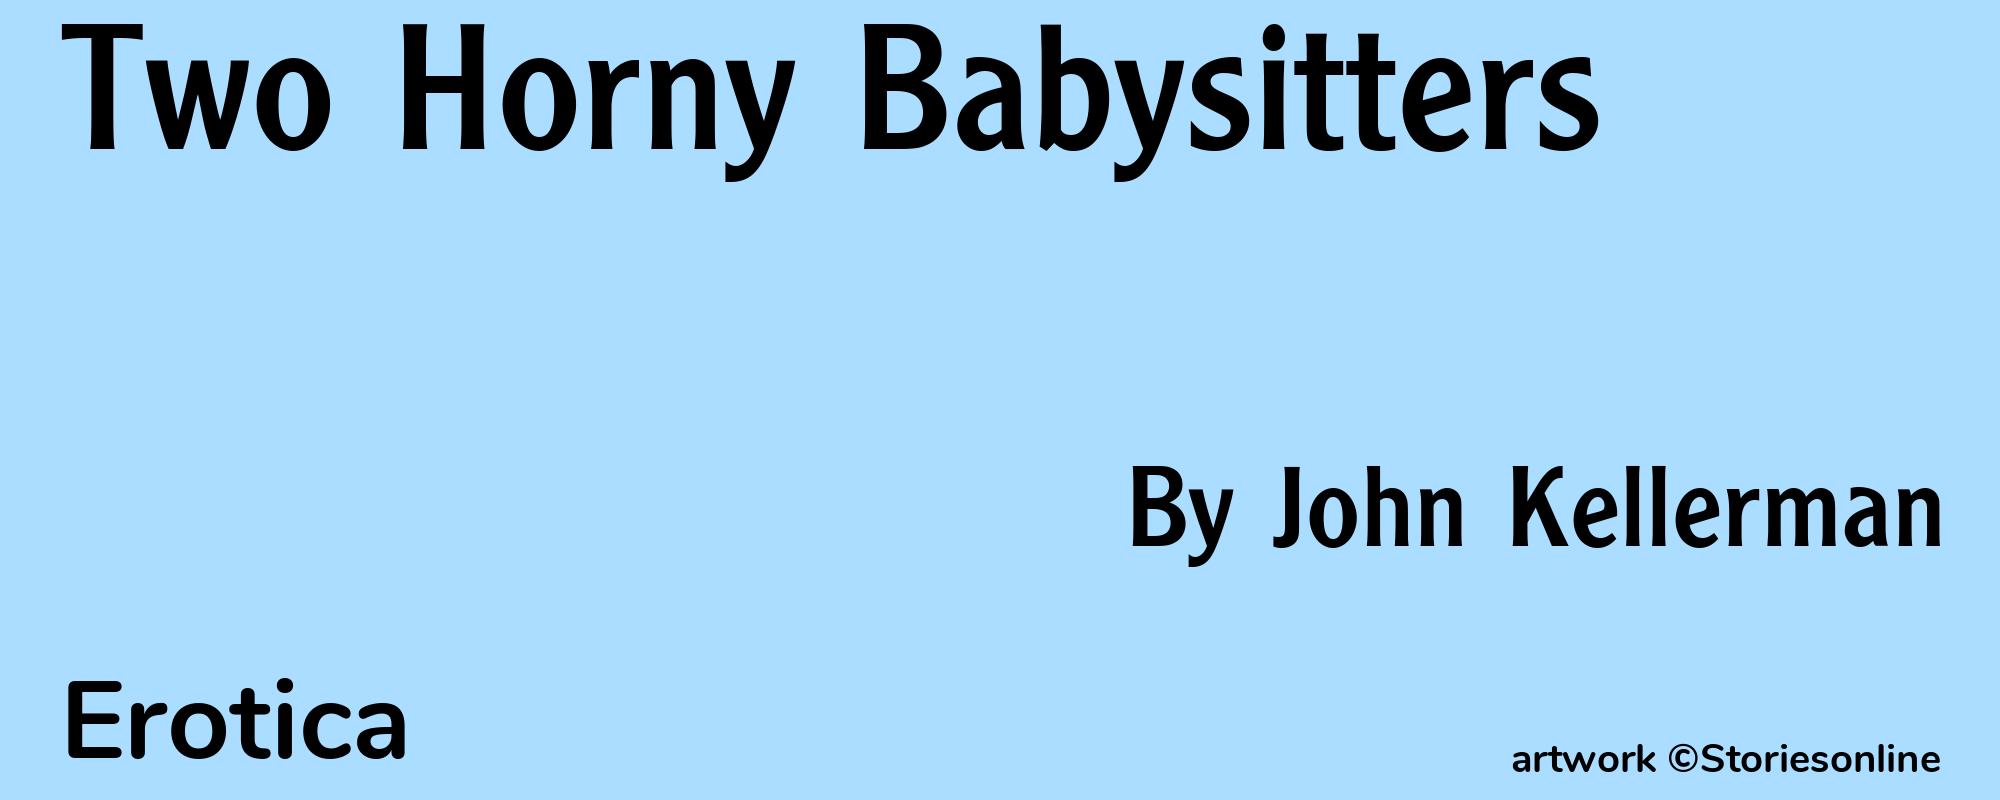 Two Horny Babysitters - Cover